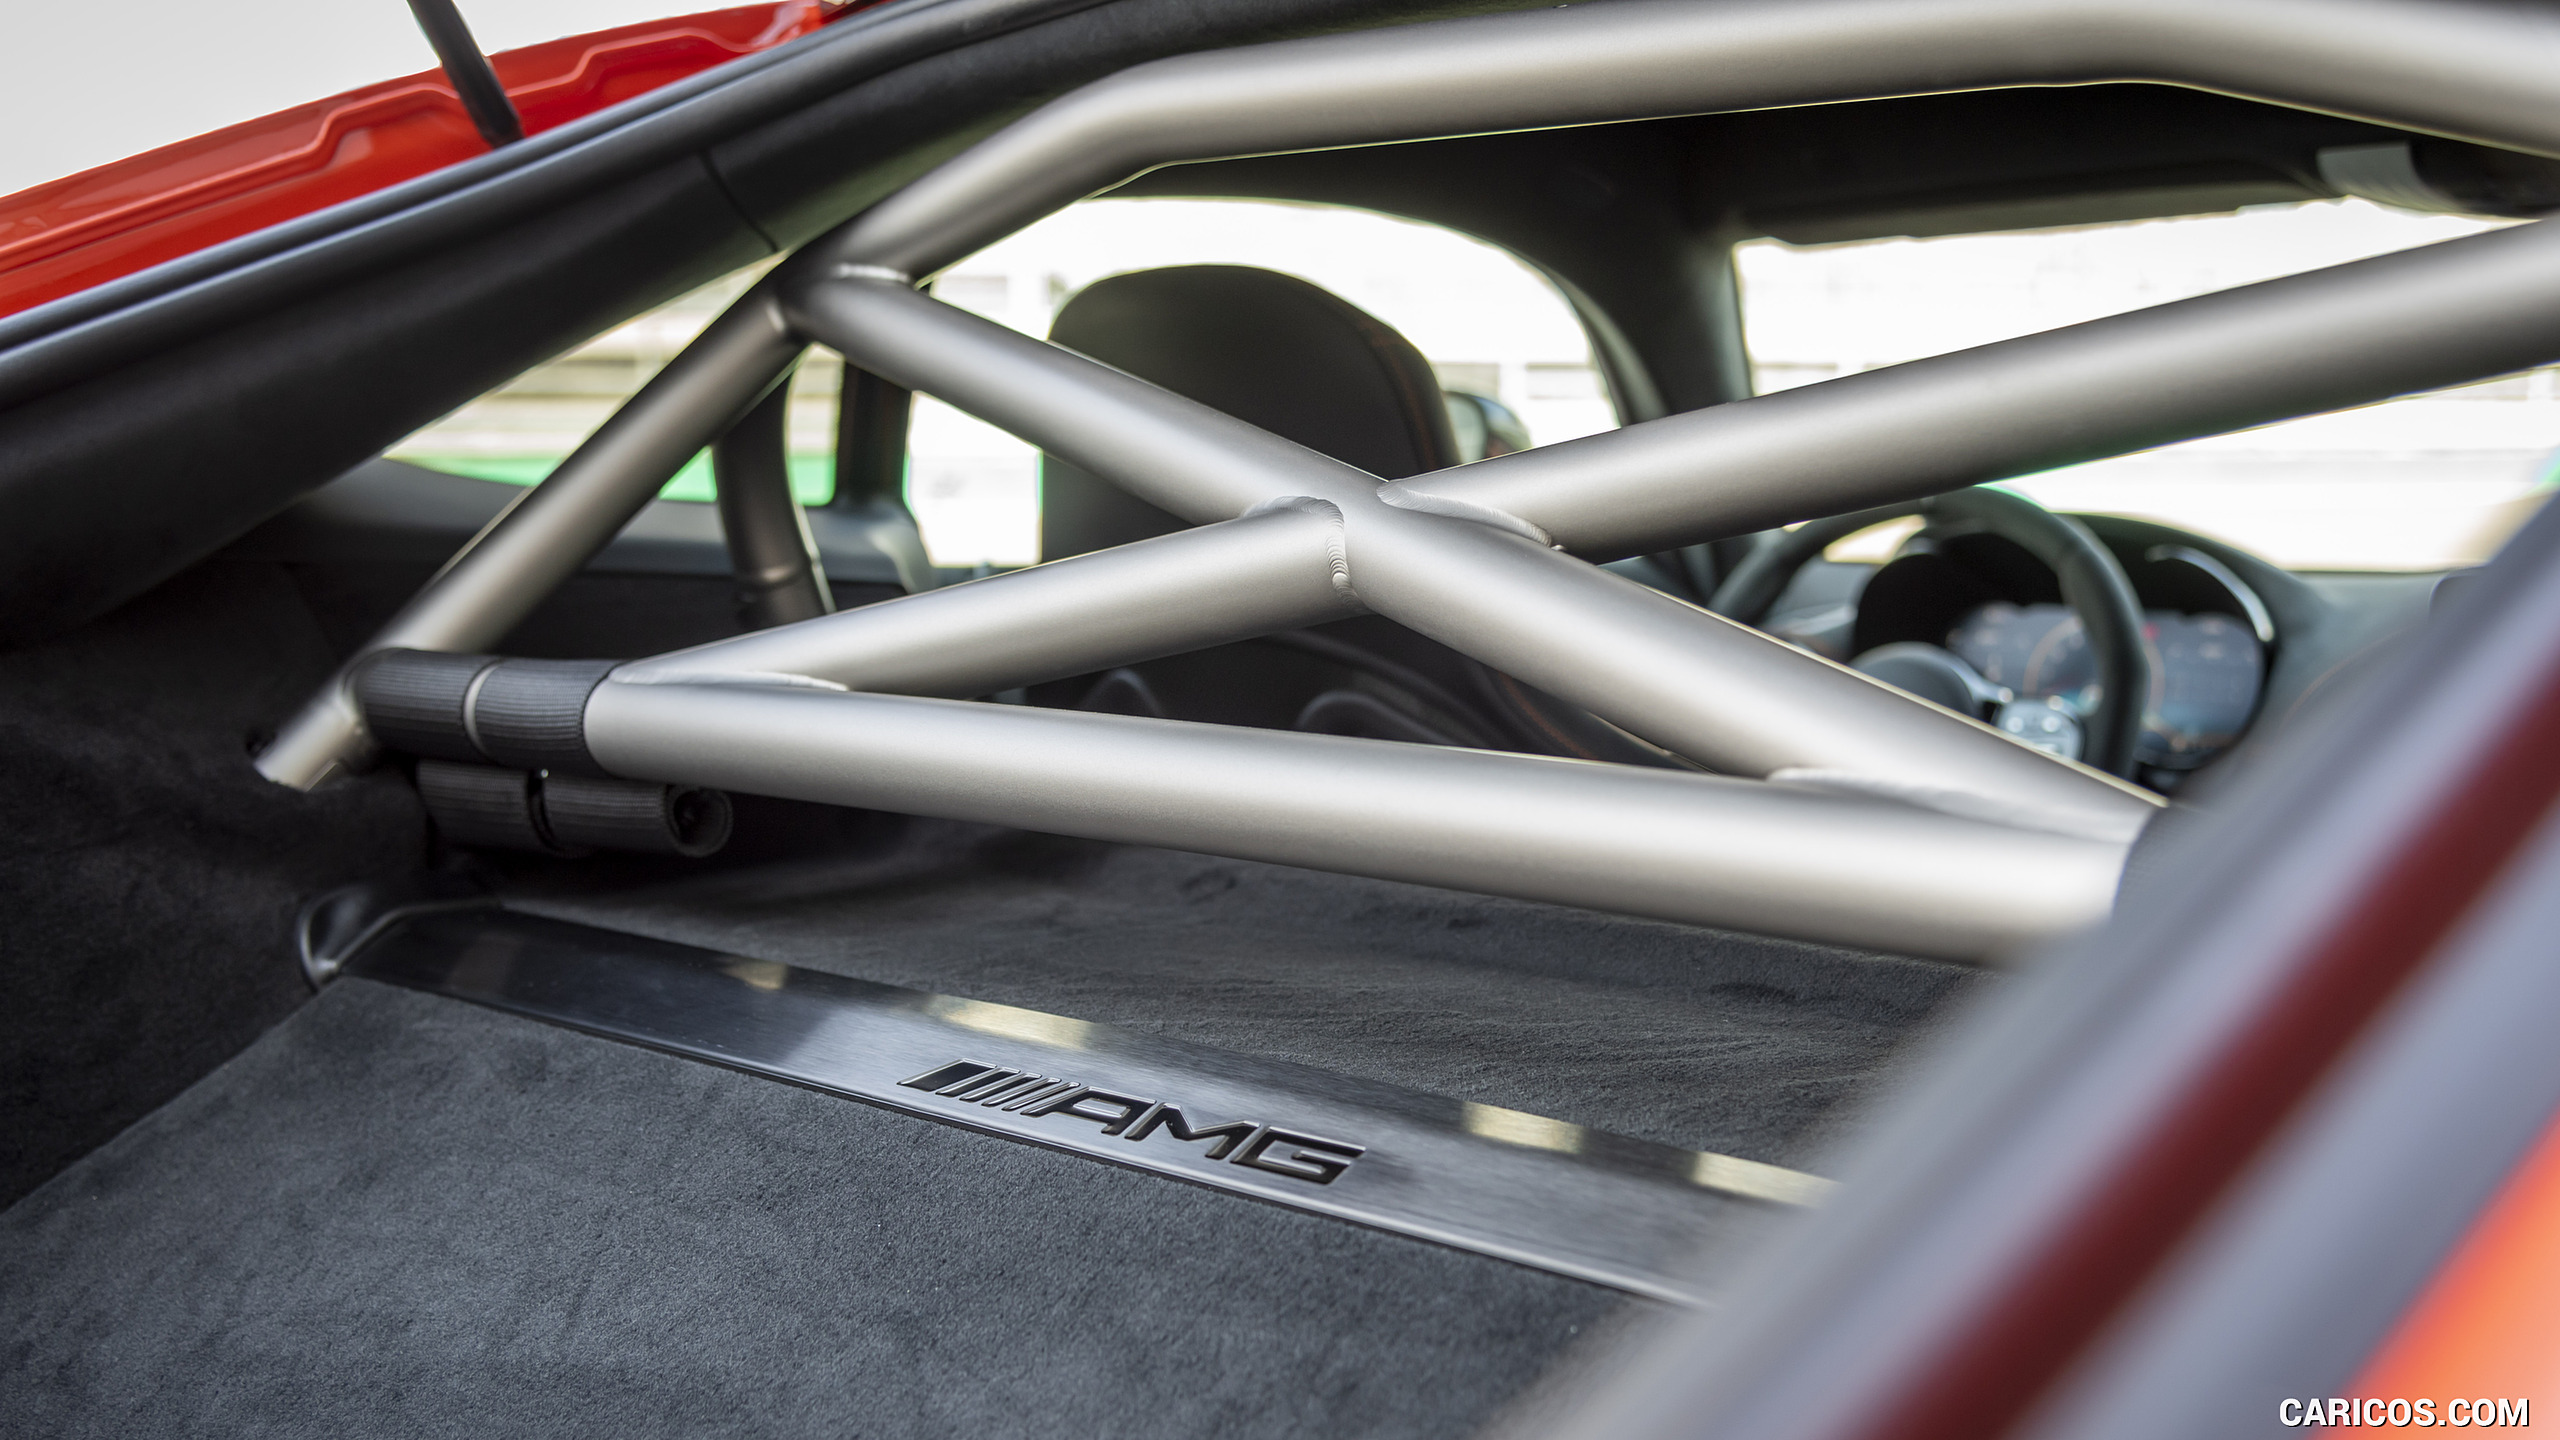 2021 Mercedes-AMG GT Black Series - Roll Cage, #211 of 215